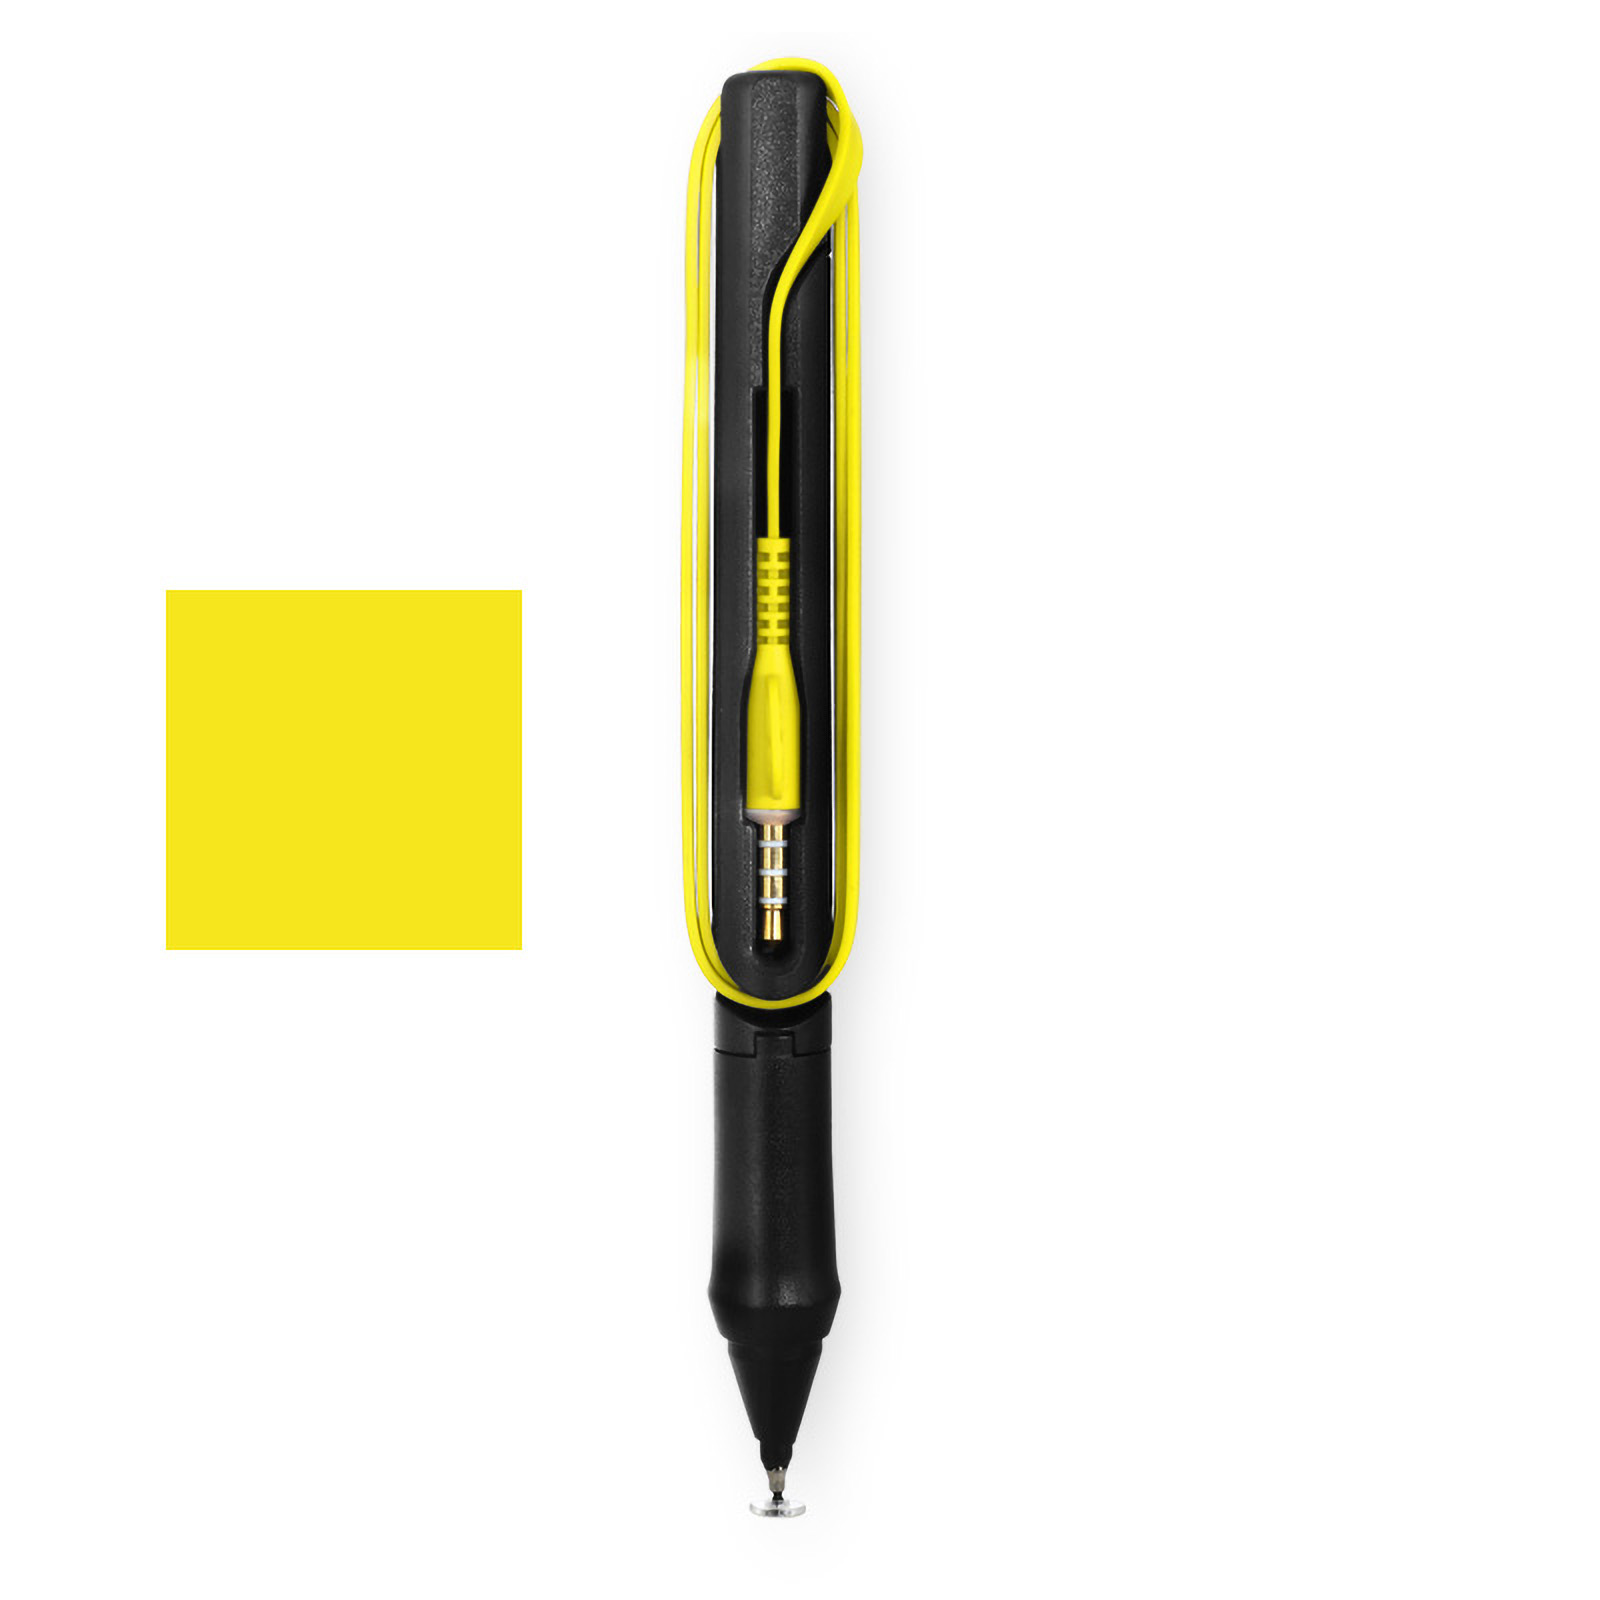 SonarPen - Pressure Sensitive Smart Stylus Pen with Palm Rejection and  Shortcut Button. Battery-Less. Compatible with Apple  iPad/Pro/Mini/iPhone/Android/Switch/Chromebook (Yellow) 